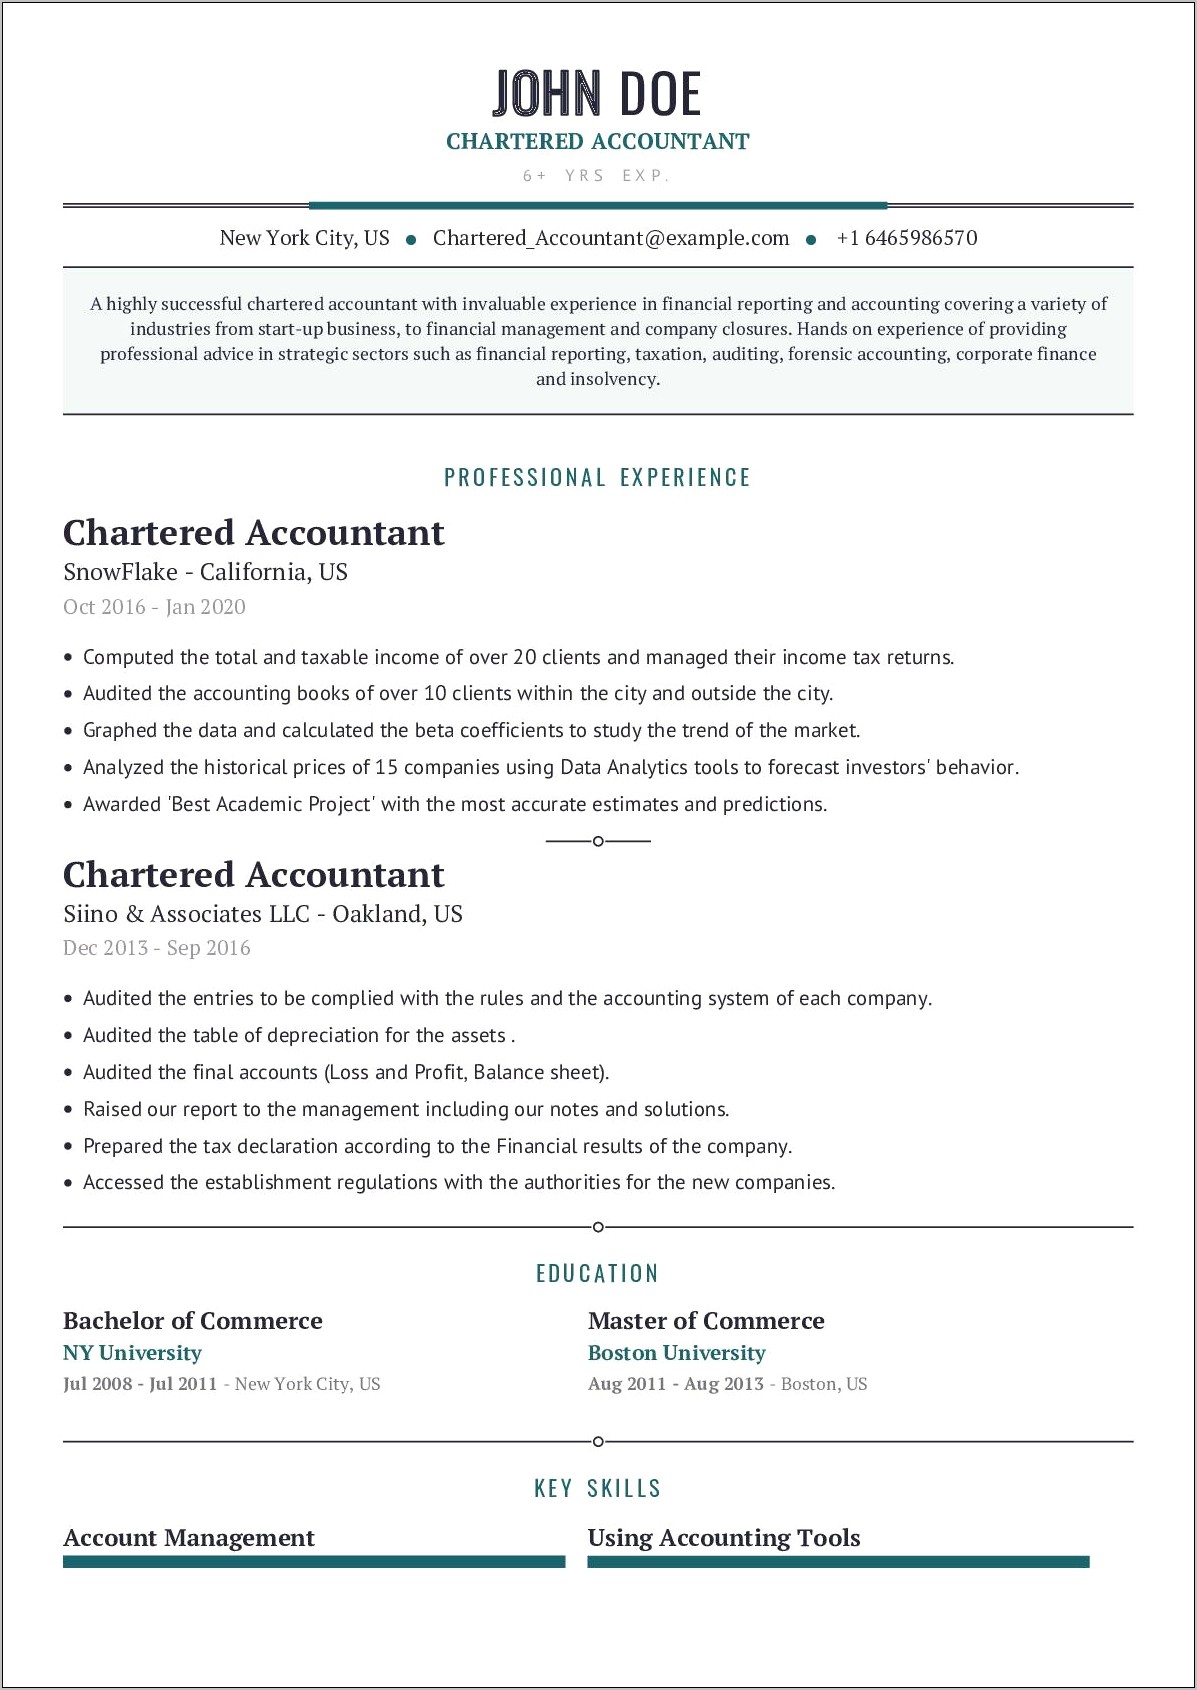 Technical Skills In Resume Accoutants